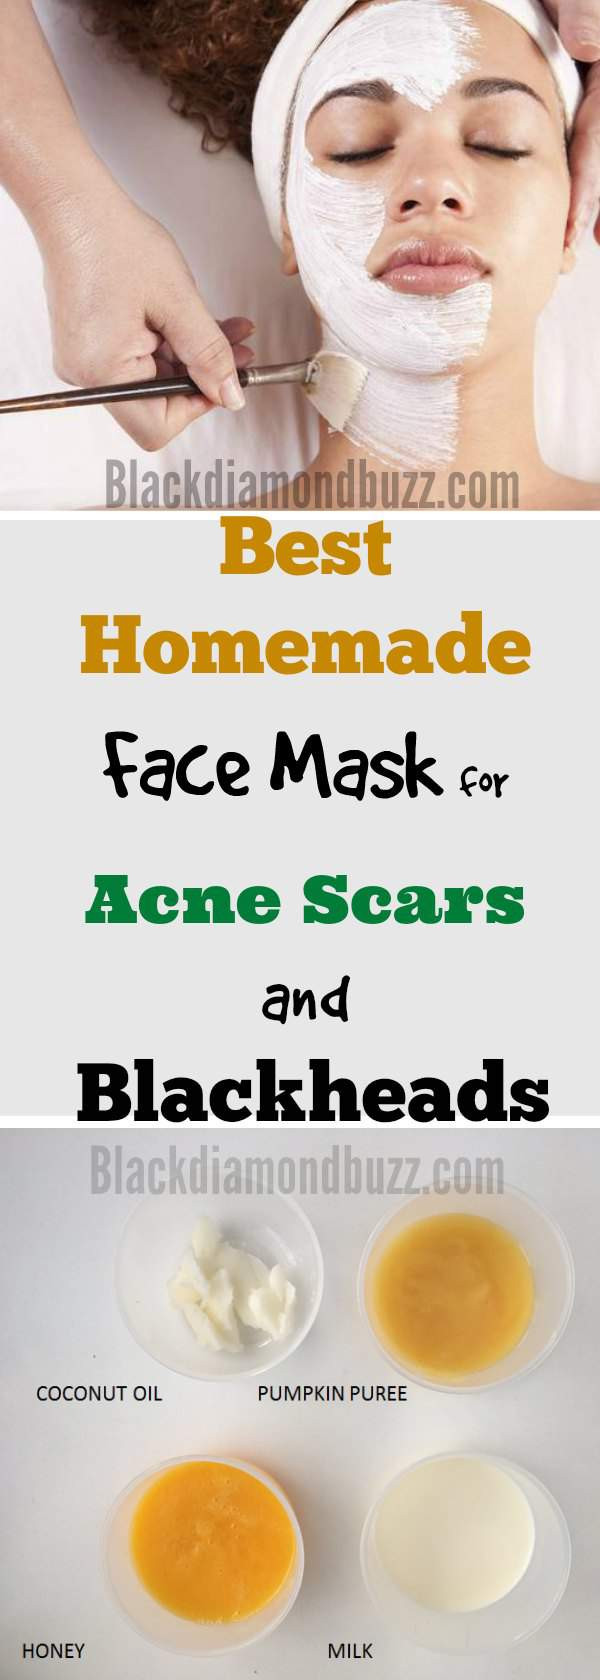 DIY Acne Scar Mask
 Homemade Face Masks For Oily Skin And Blackheads